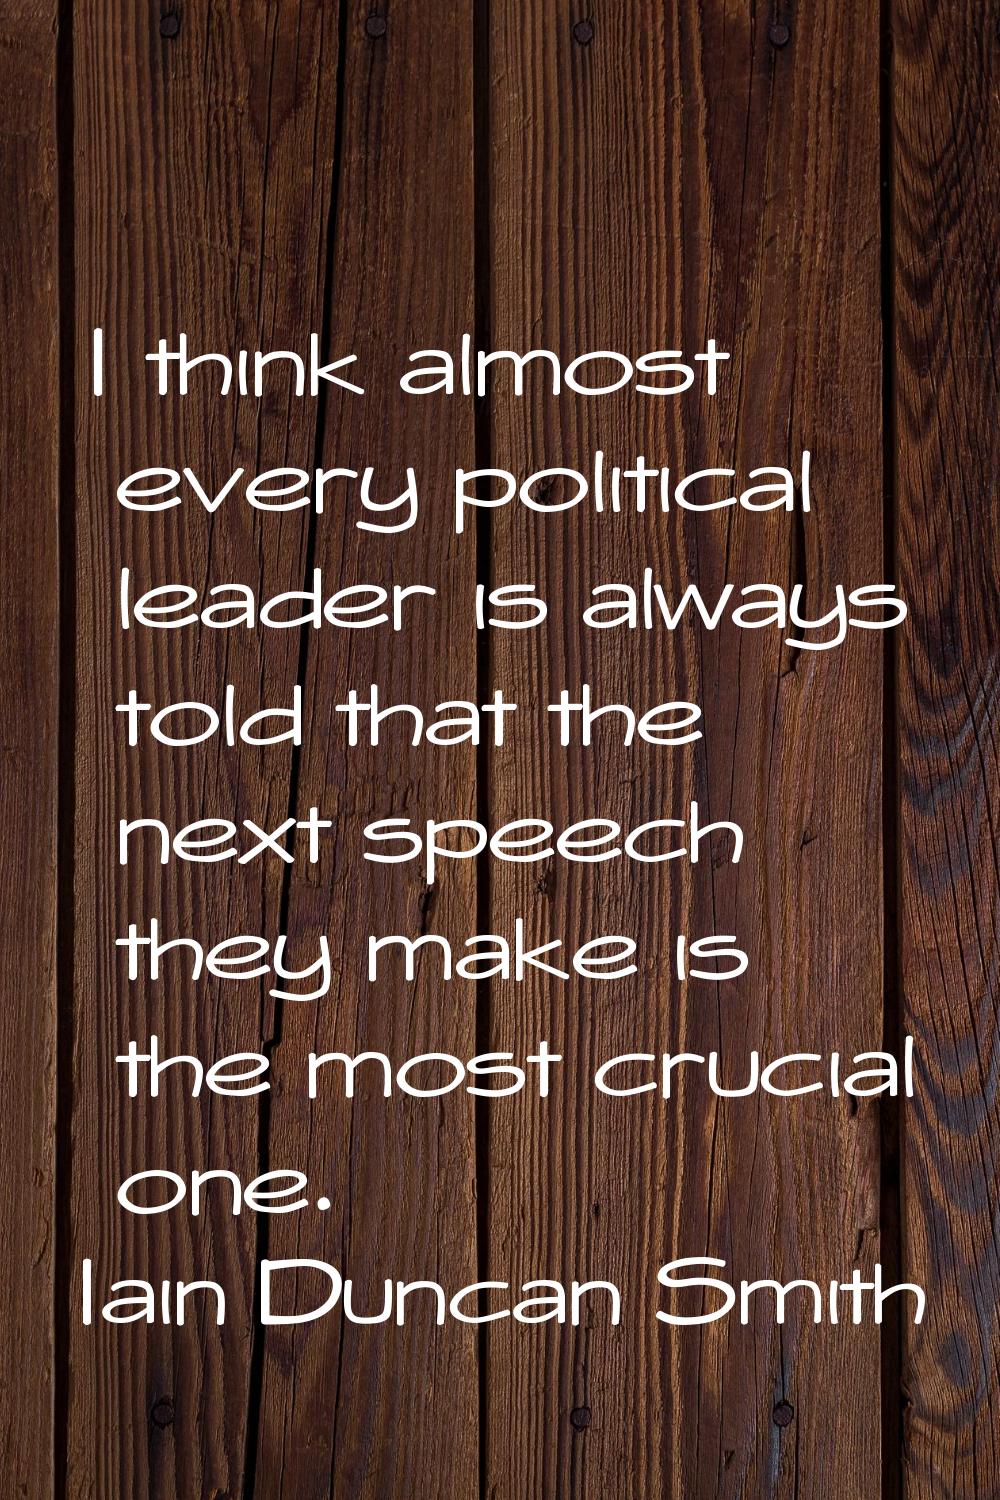 I think almost every political leader is always told that the next speech they make is the most cru